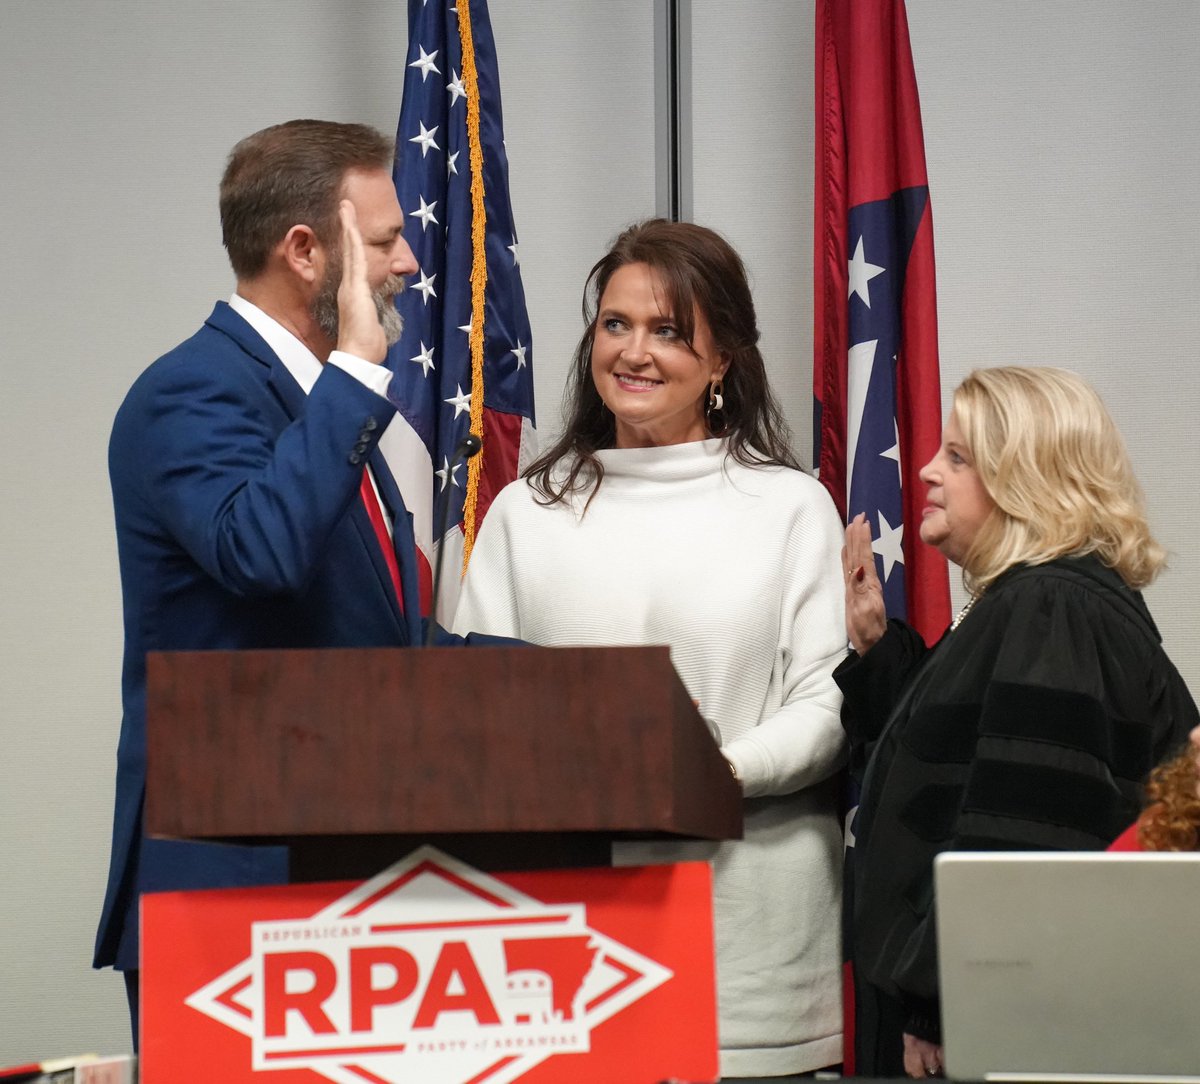 Congratulations to @cody_hiland on being elected the new @ARGOP Chairman. Arkansas Republicans have come a long way, but I believe there are even better days ahead for our party! 